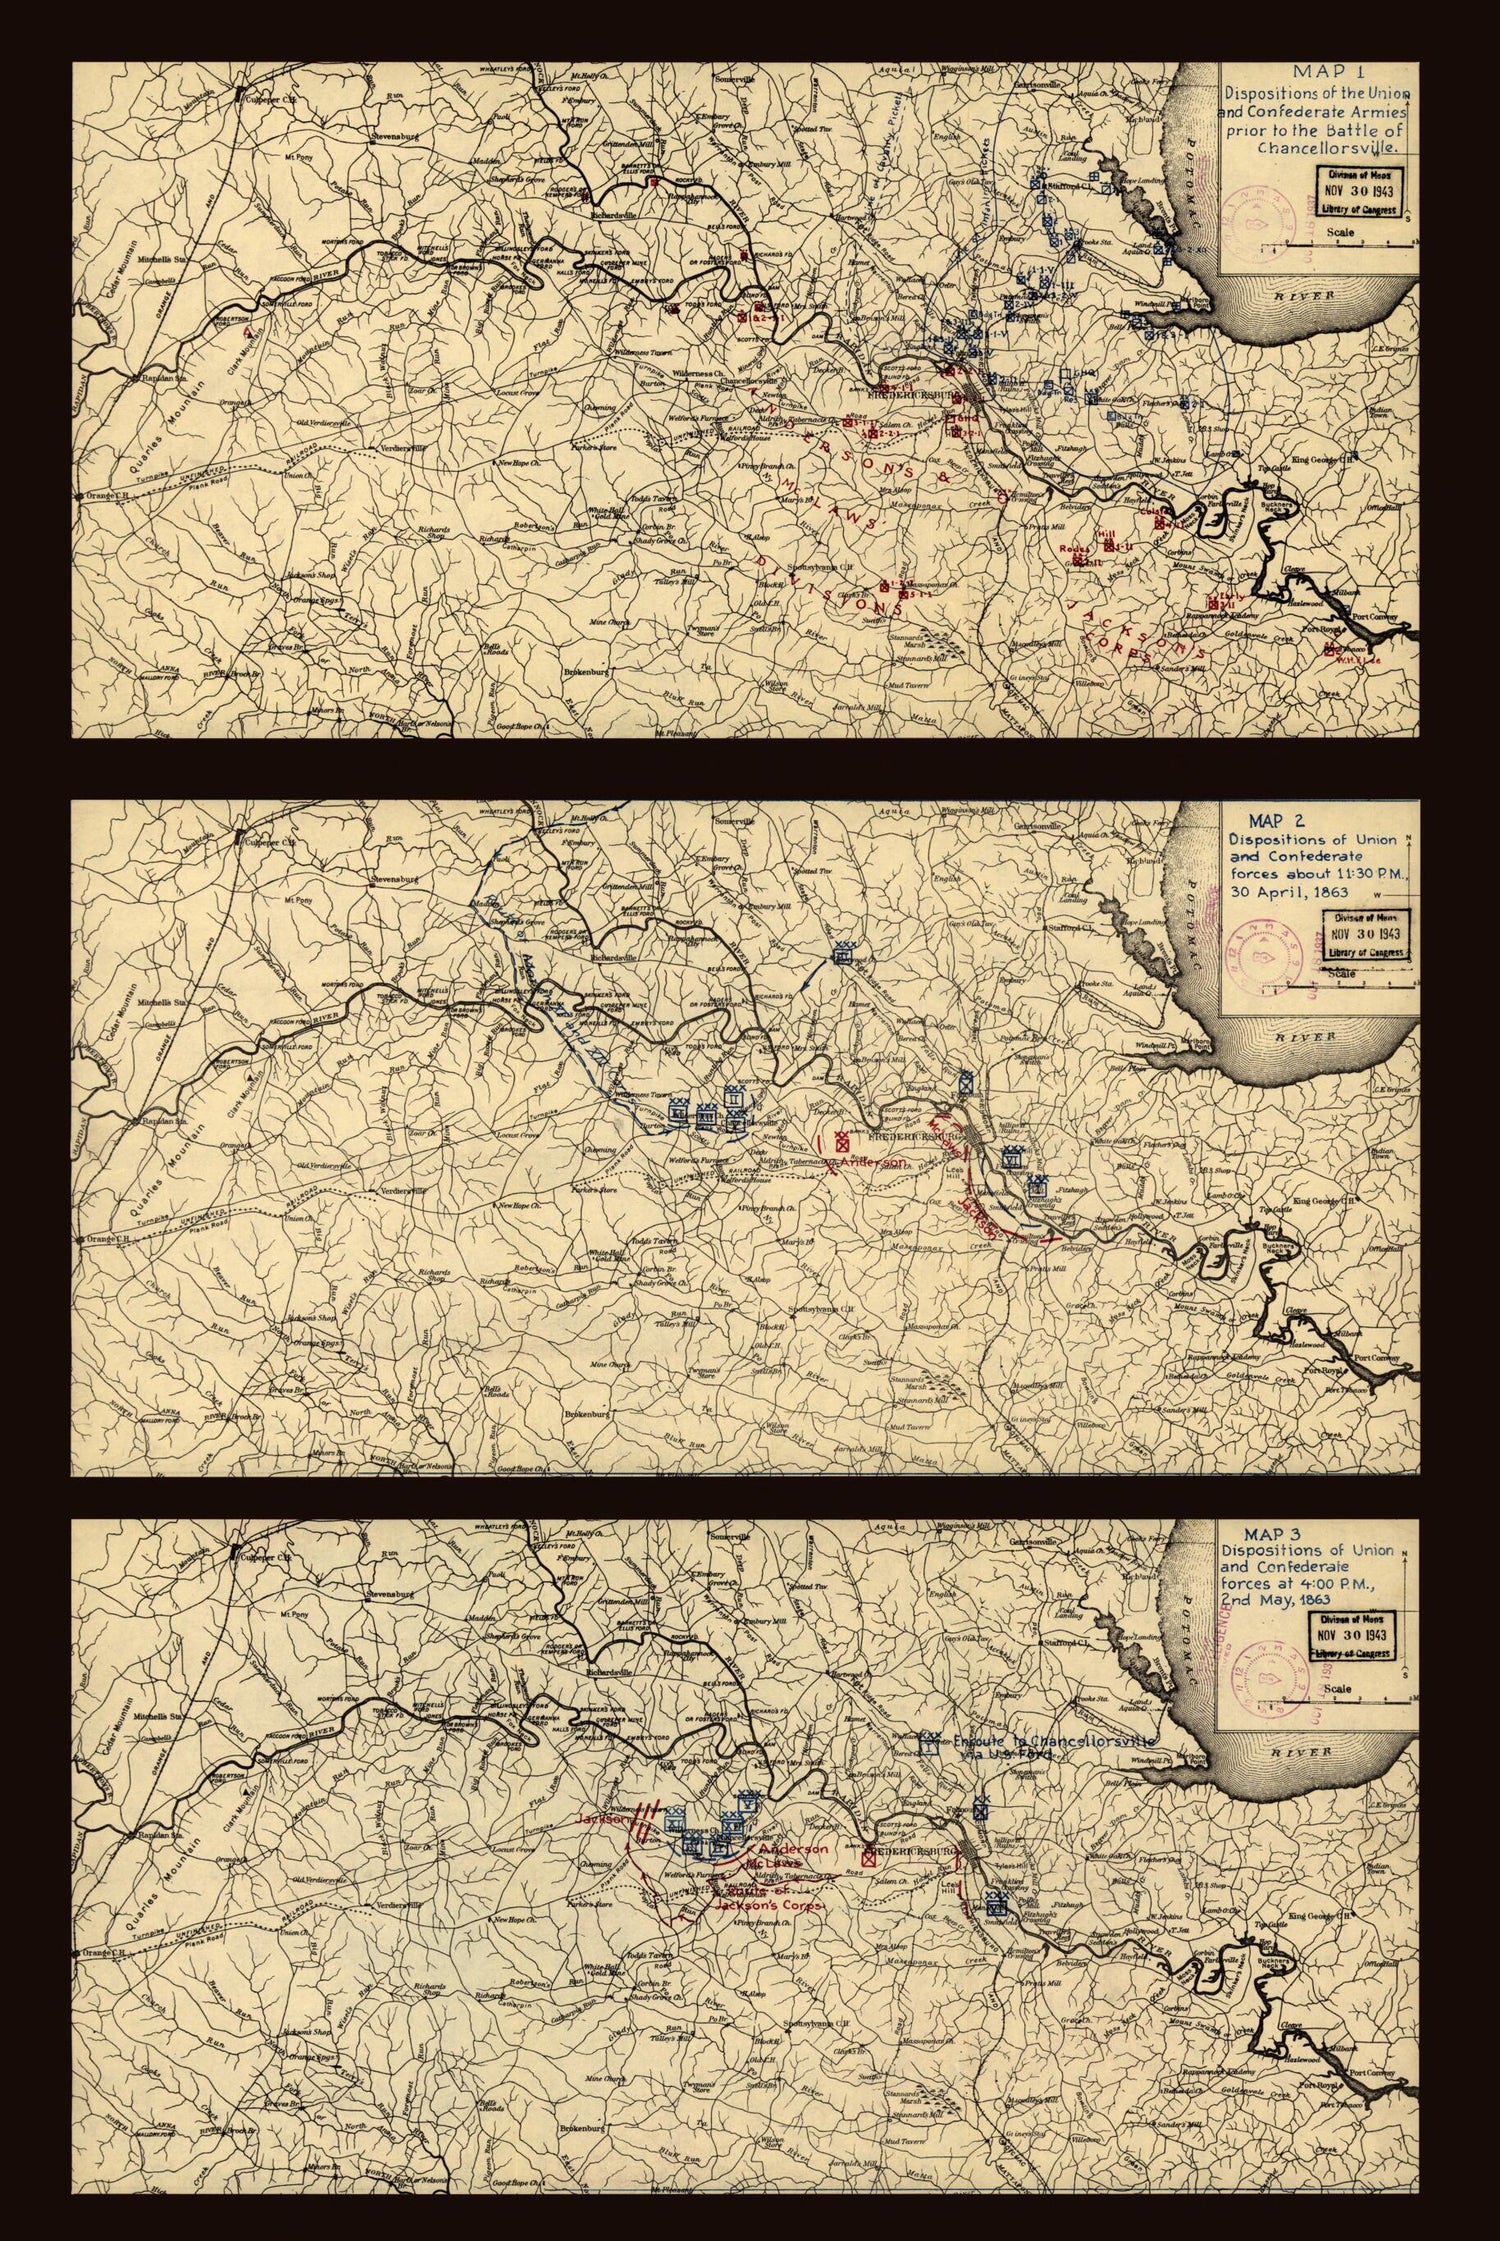 This old map of Battle of Chancellorsville from 1863 was created by  in 1863